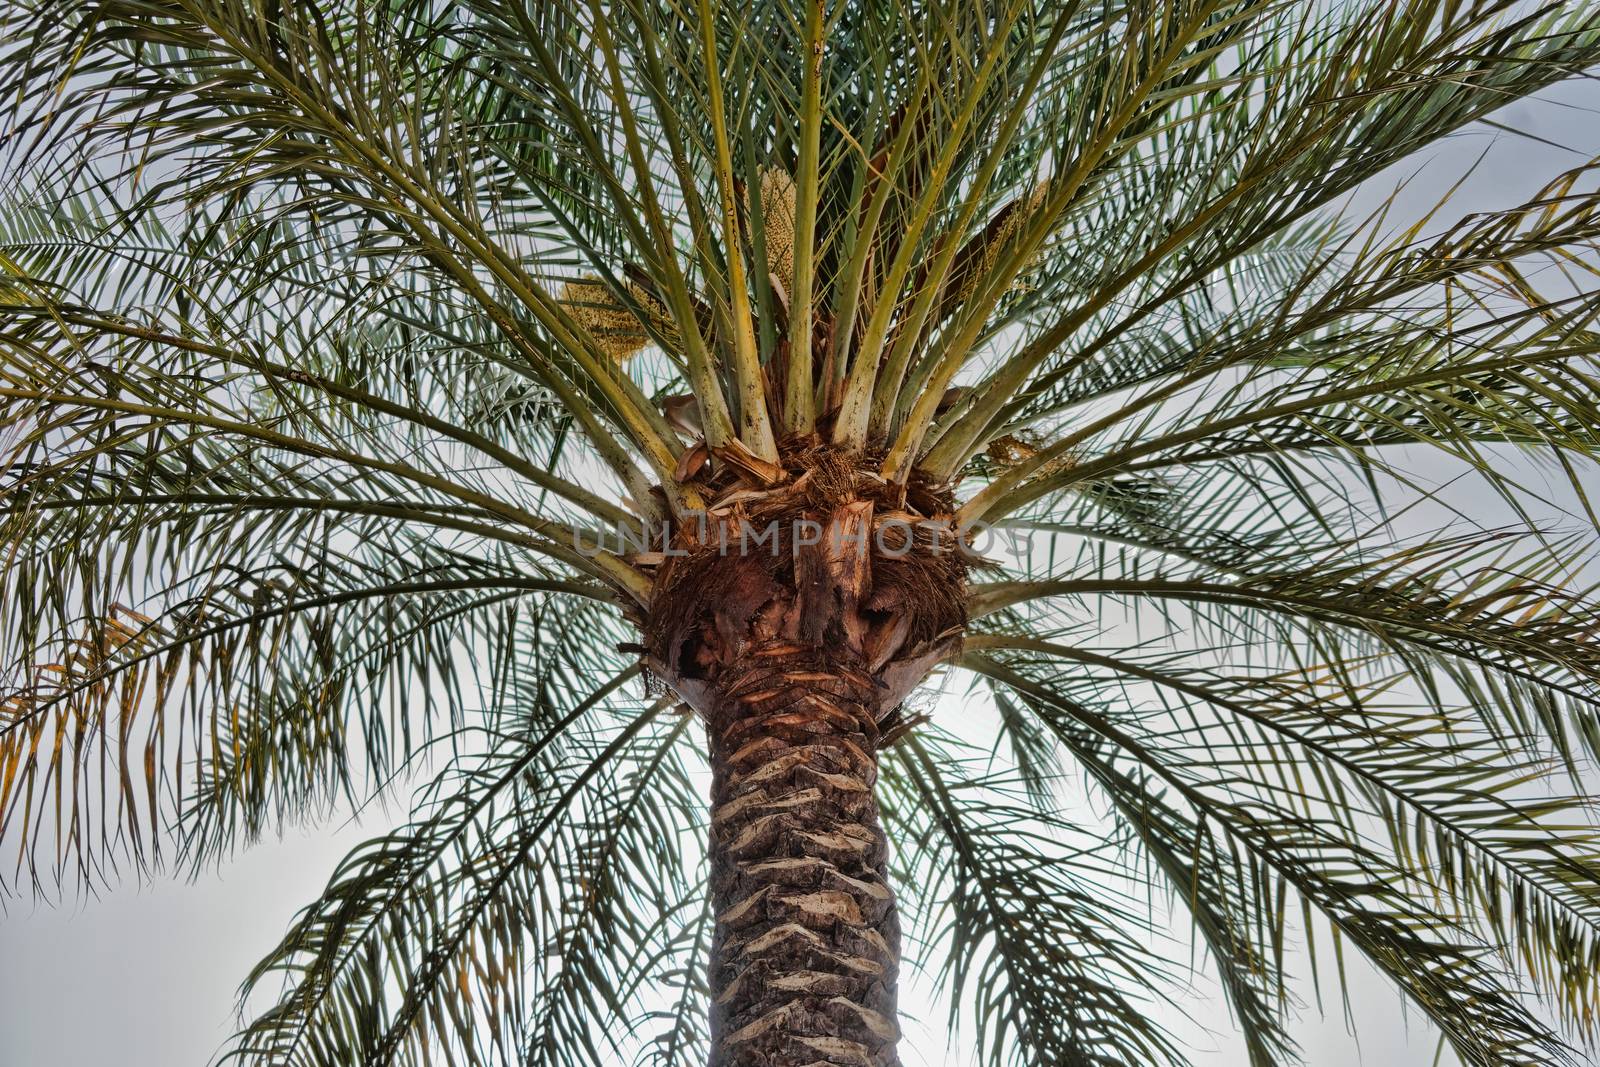 Large palm tree in the back light, photographed on the beach of Aqaba, Jordan, midle east